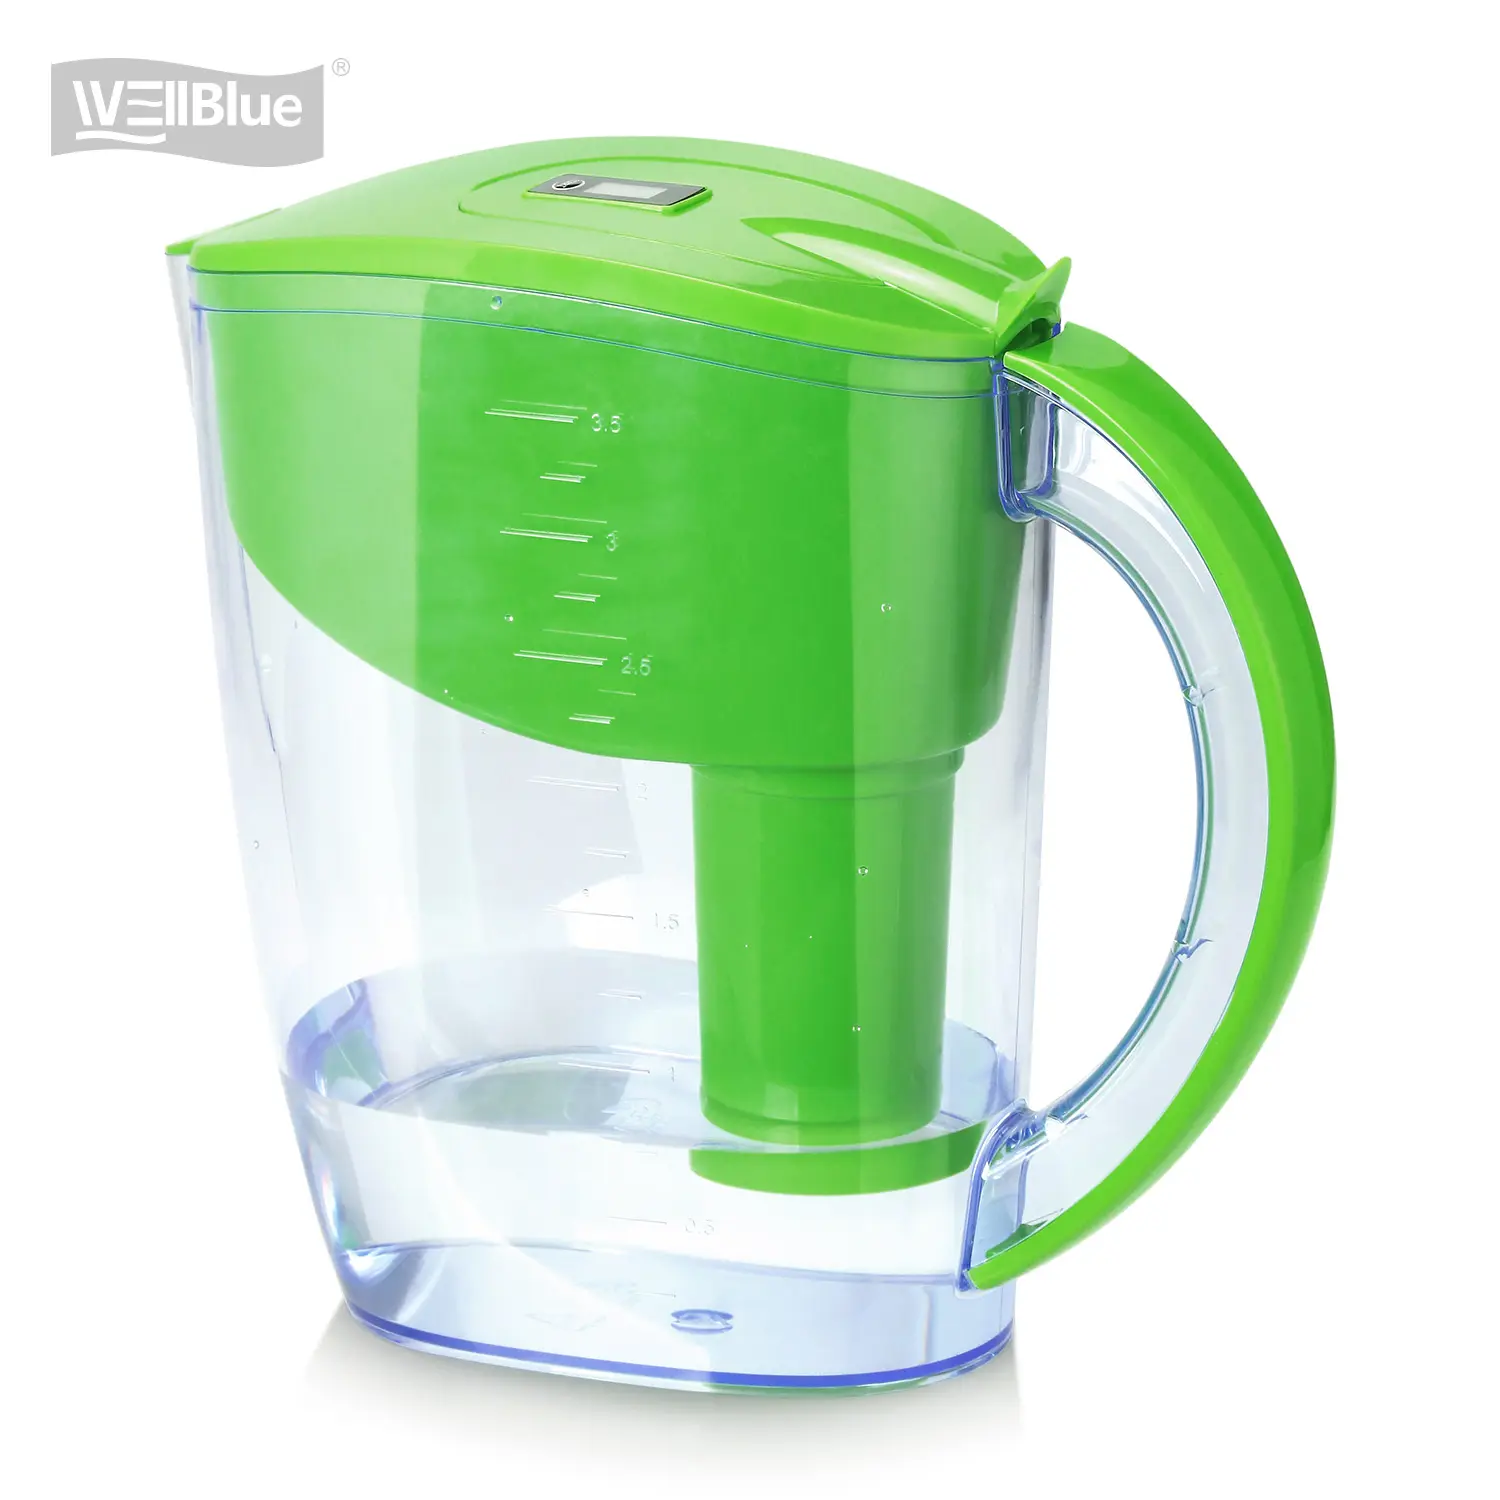 Top Reviewed BPA Free Best Fridge Water Filter Pitcher For Kitchen Alkaline Ionizer Water Filter Pitcher That Removes Chlorine